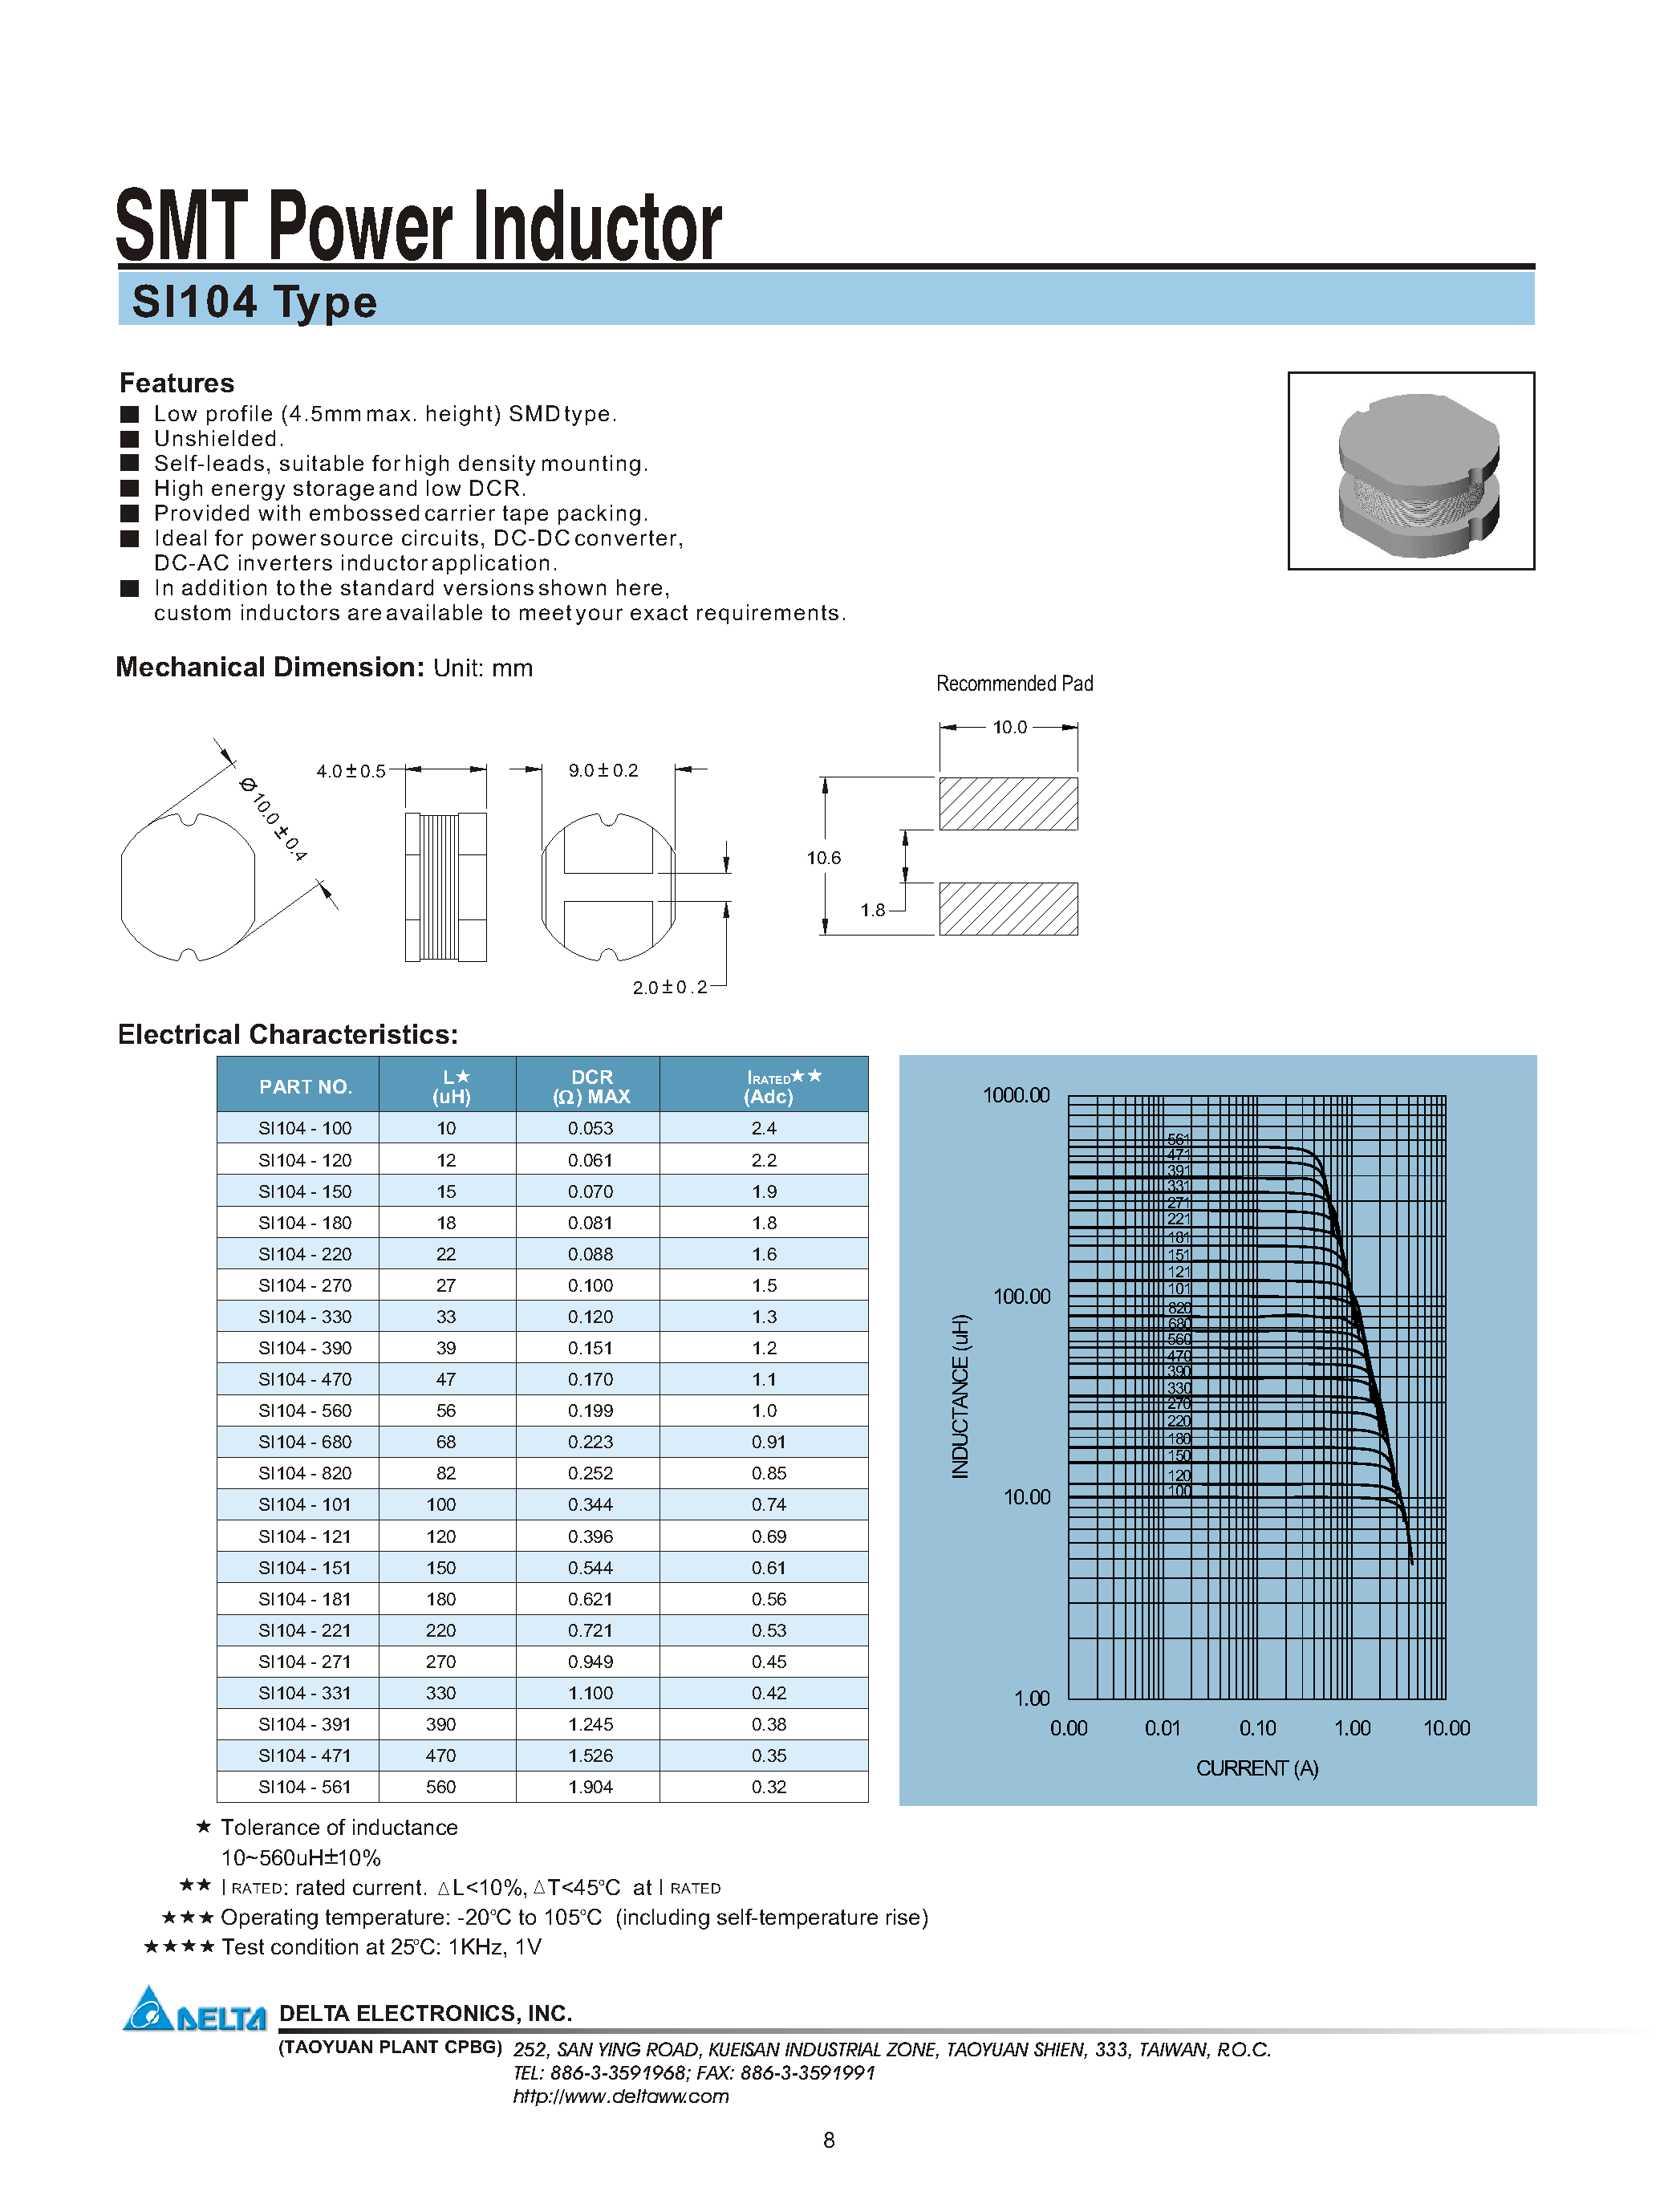 Datasheet SI104-680 - SMT Power Inductor page 1